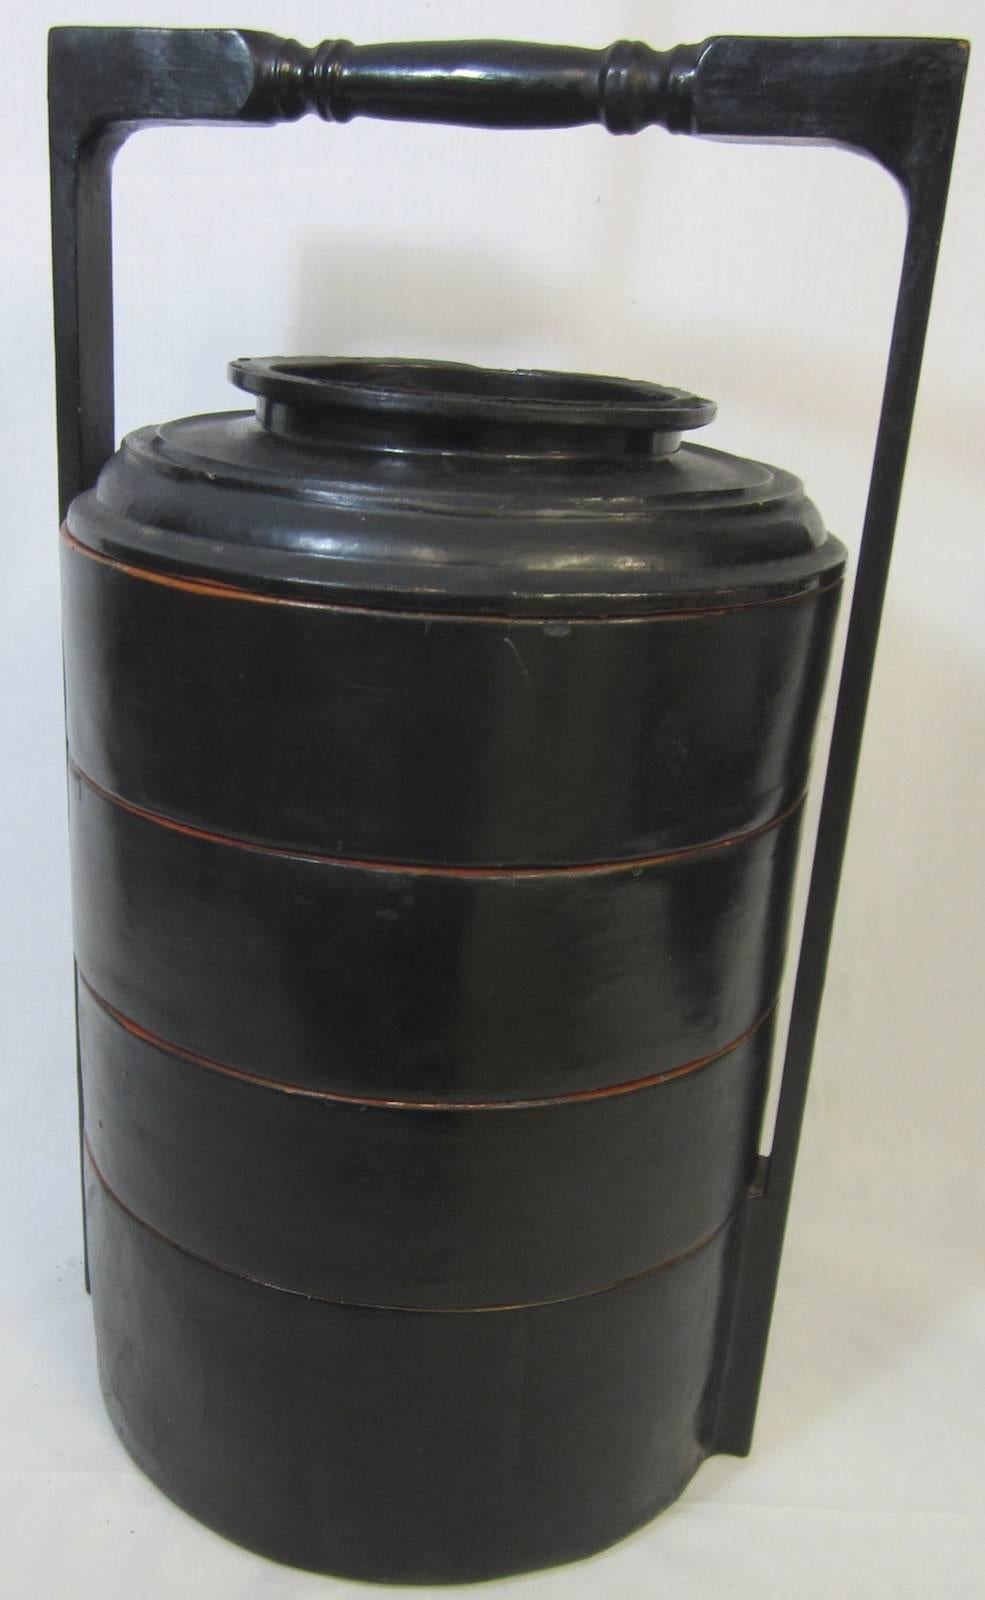 Chinese black lacquer four-tier food basket,
with red lacquer interior, some faults.